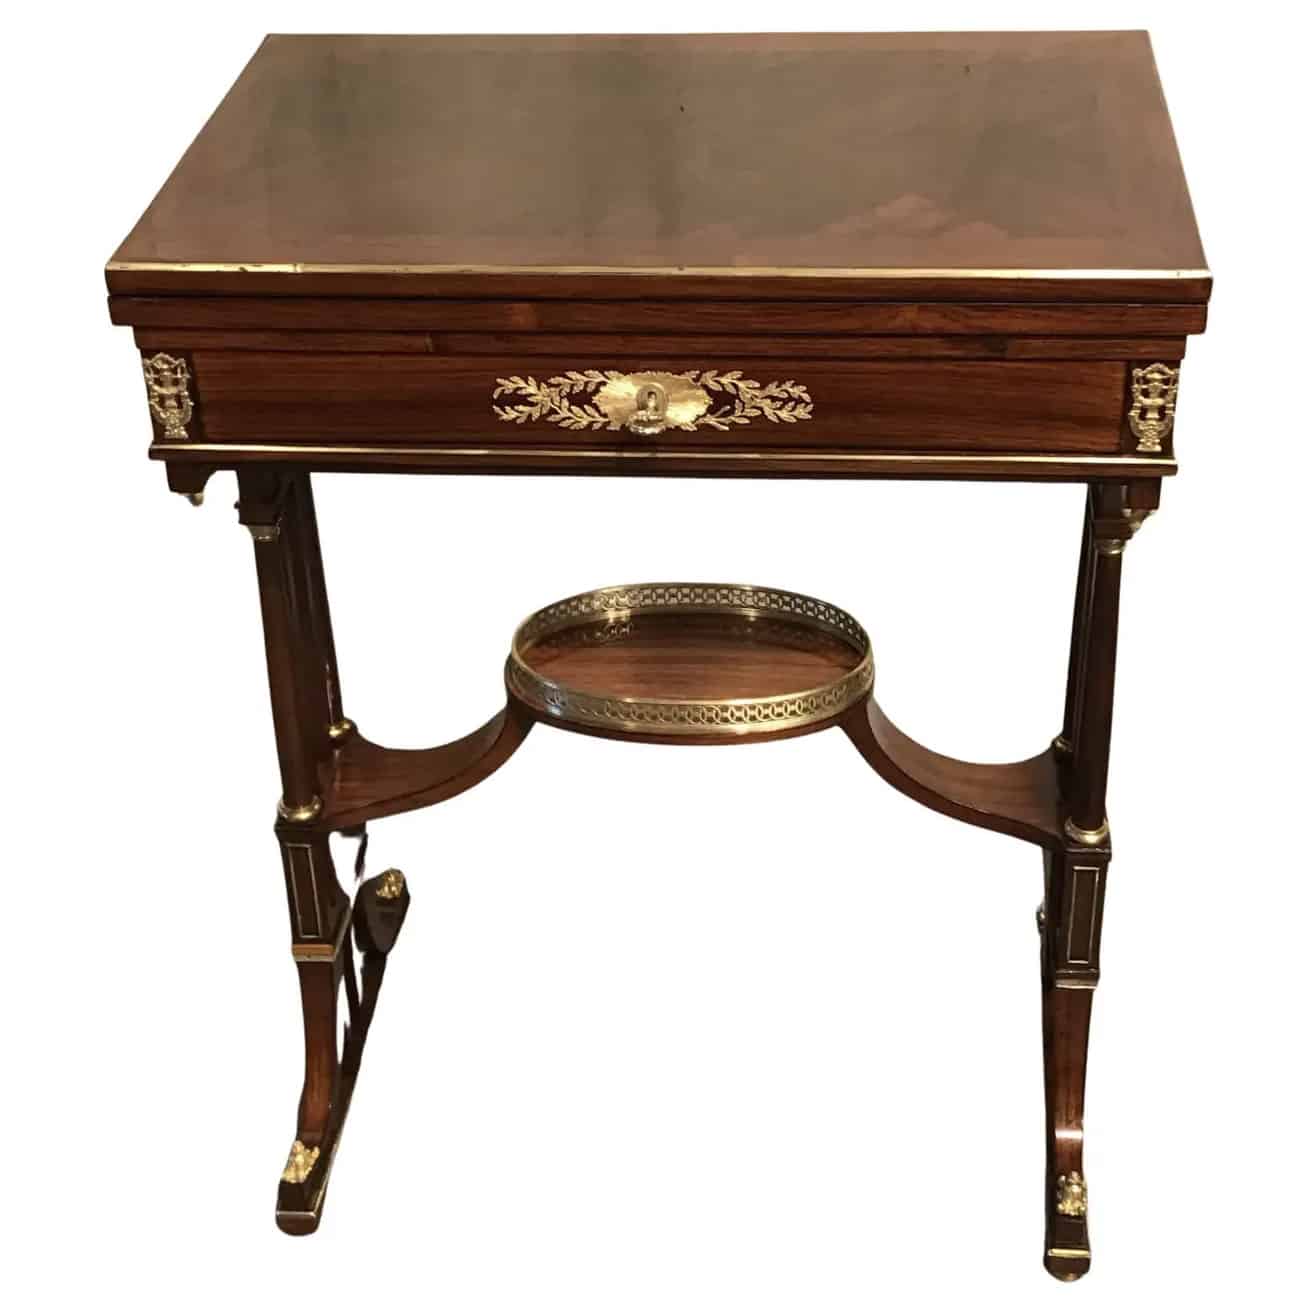 Antique Card Tables and the History of Card Games